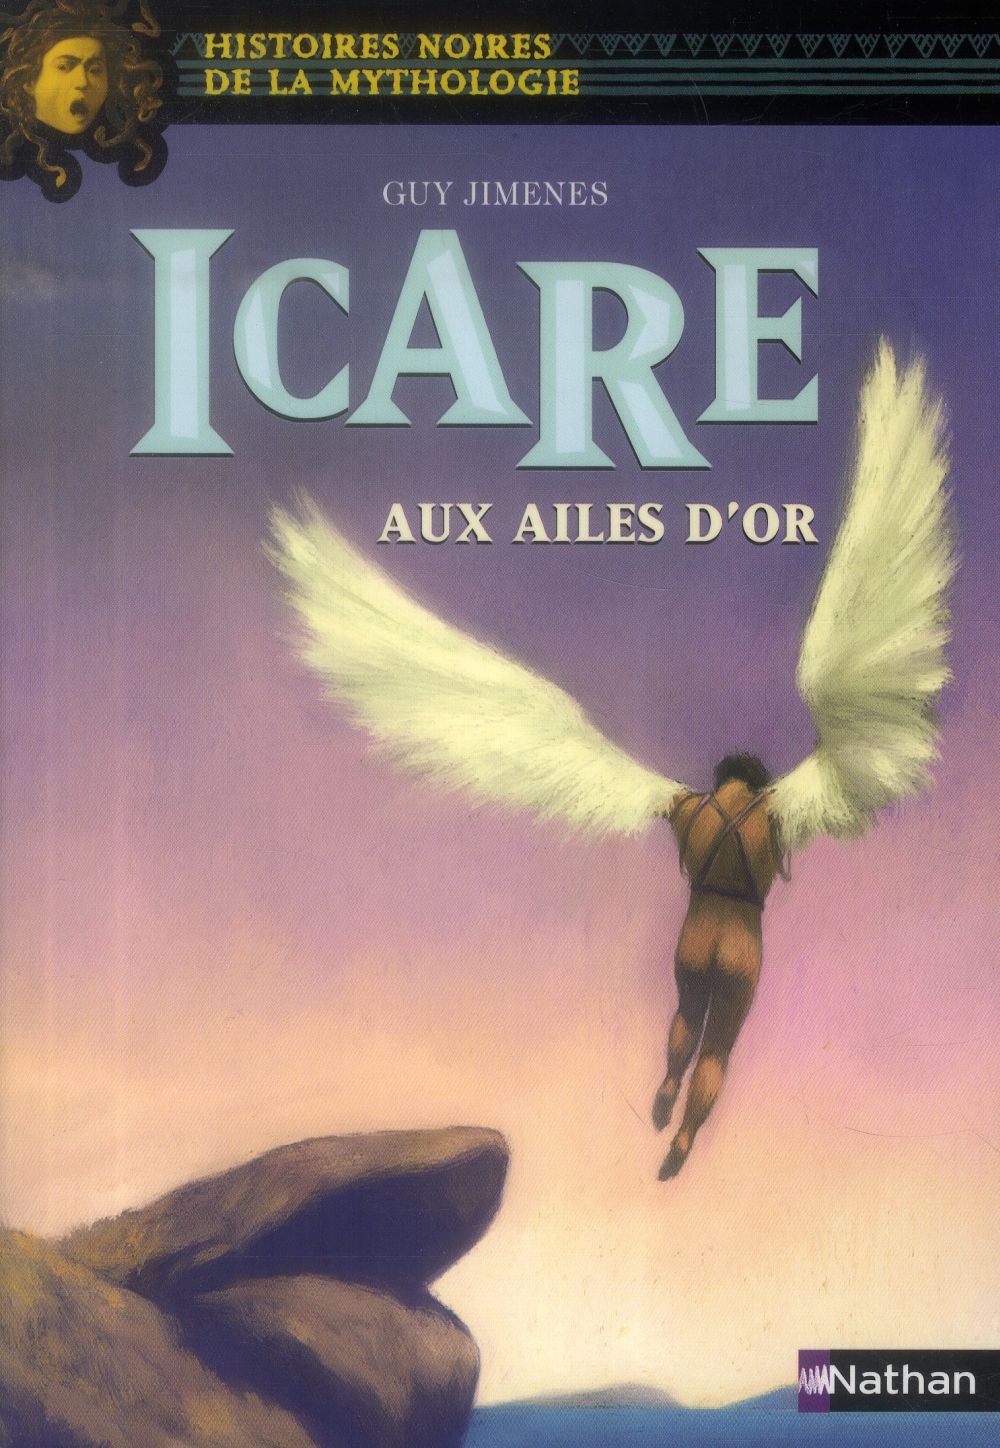 ICARE AUX AILES D'OR